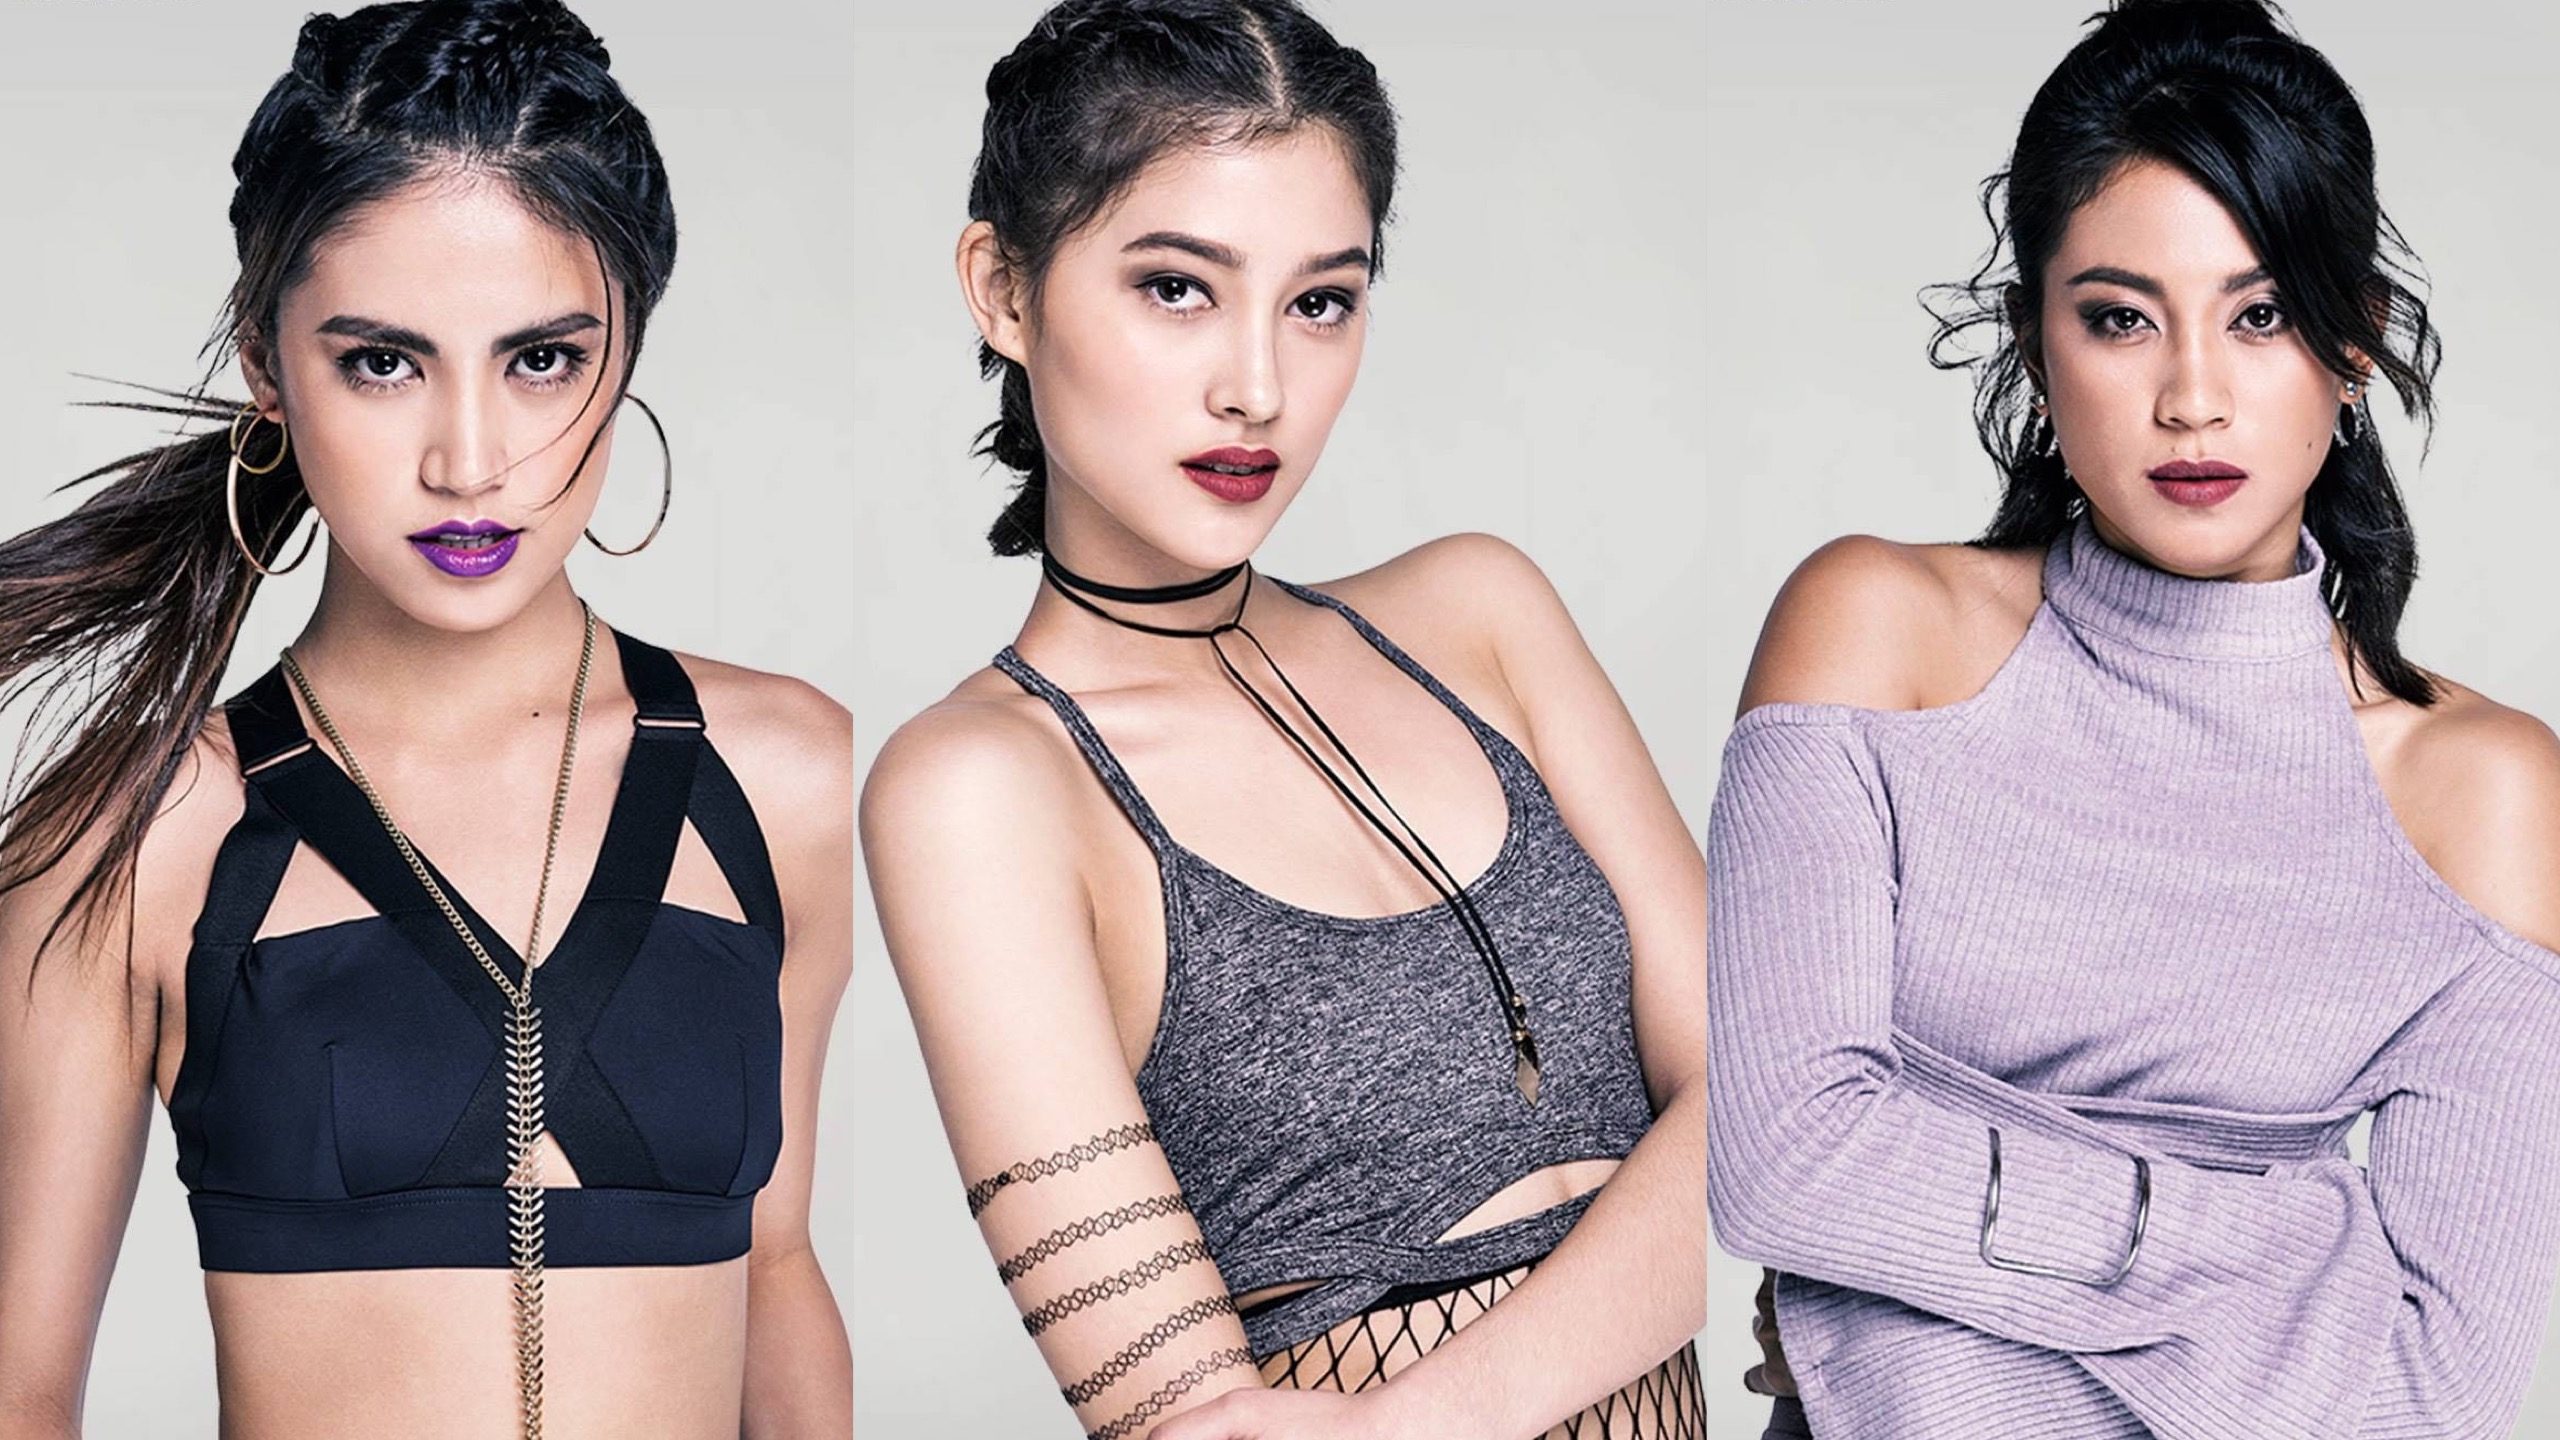 Meet the PH contestants on ‘Asia’s Next Top Model’ cycle 5